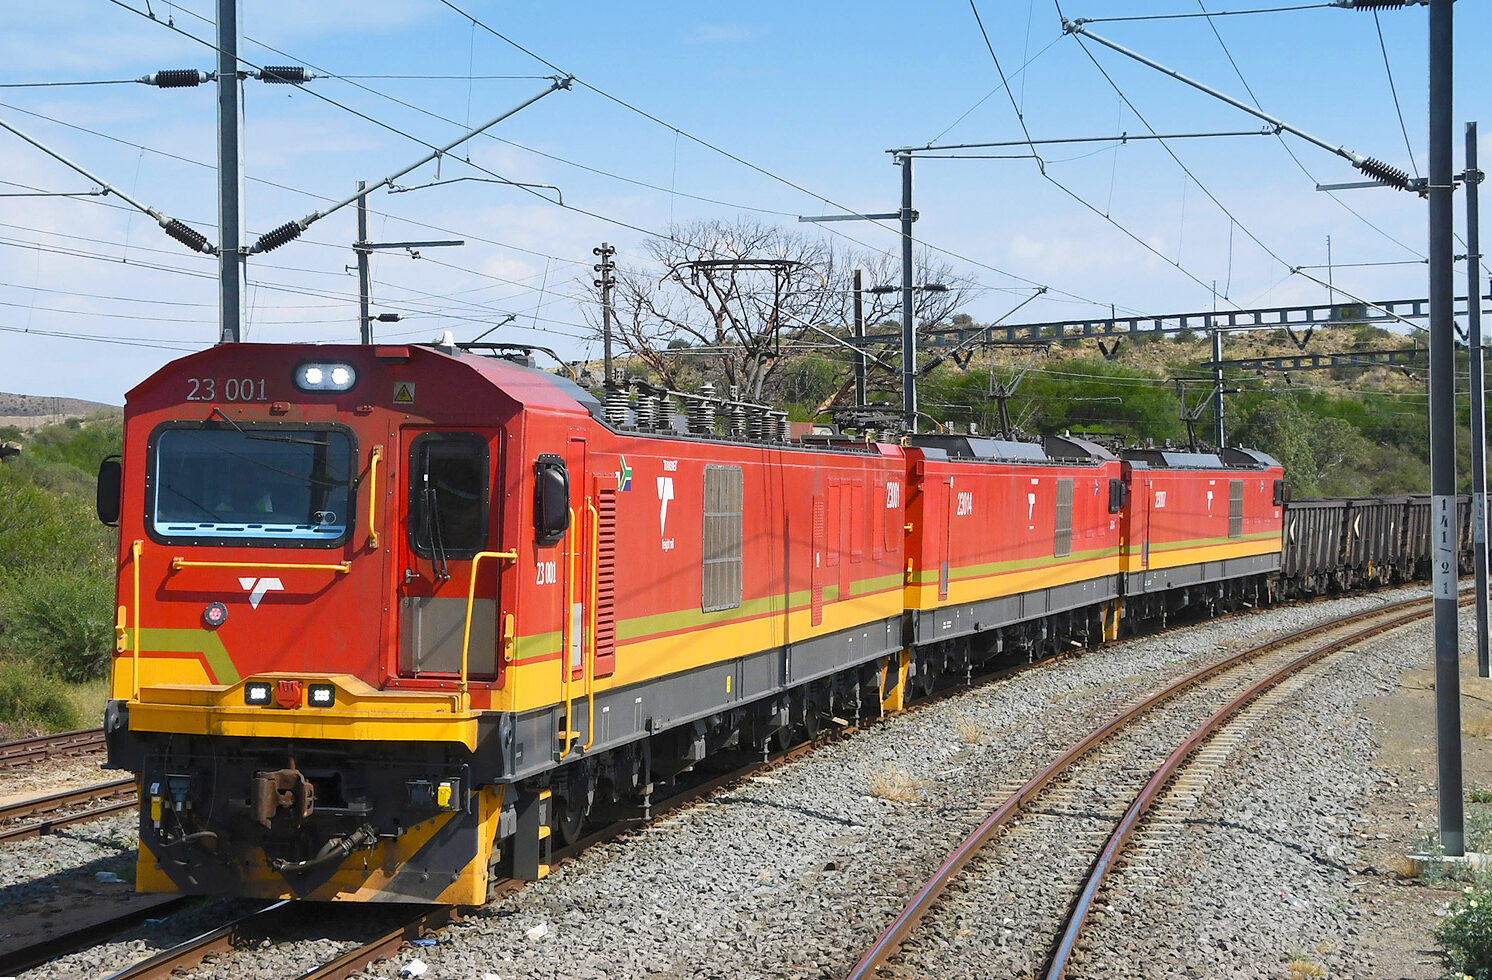 TRAXX electric locomotive by Bombardier delivered to South Africa under a 2014 contract